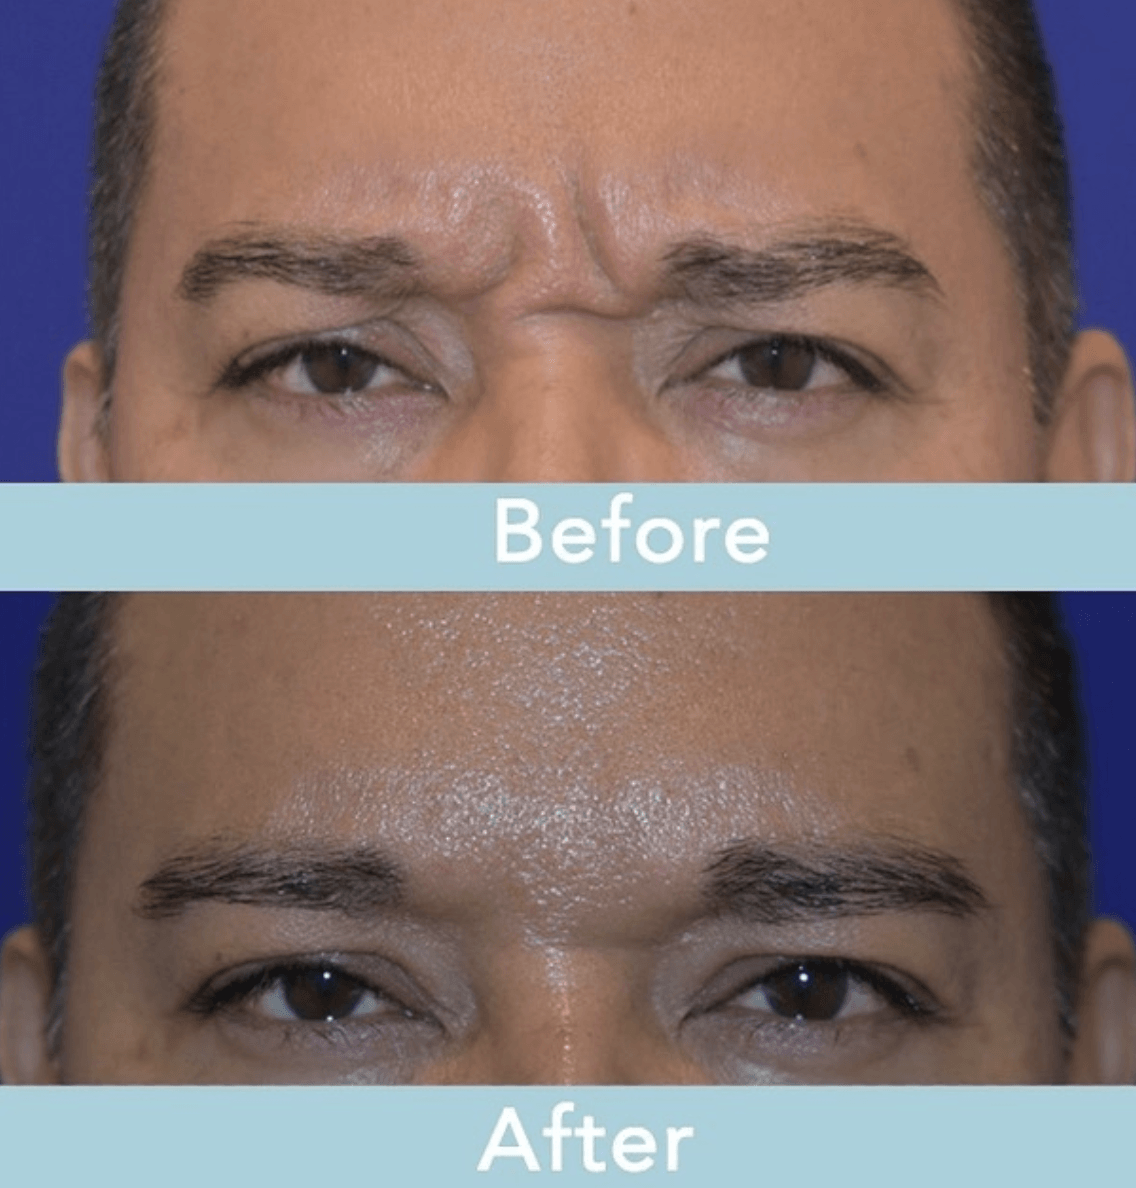 Muscle Used To Form The Horizontal Frown Crease On The Forehead